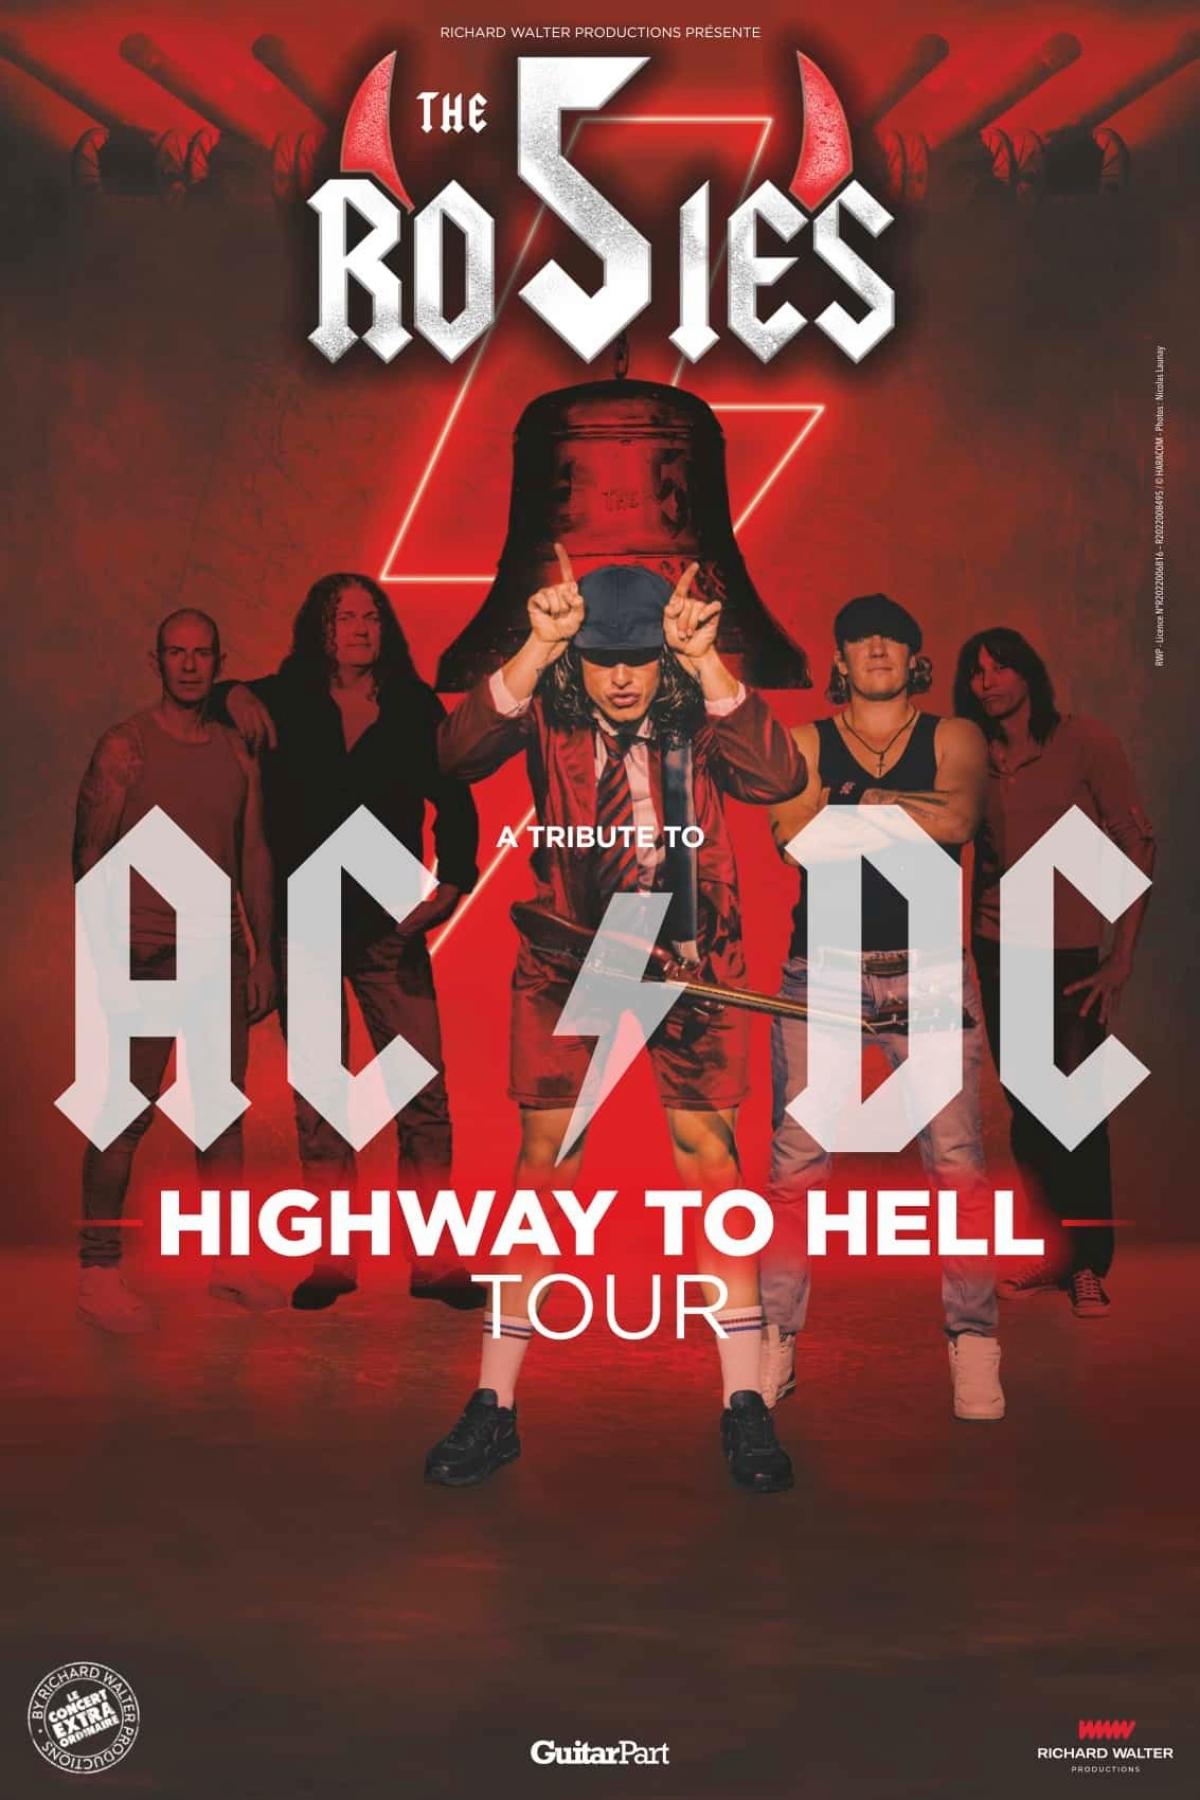 The 5 Rosies - Highway To Hell Tour at Espace Dollfus Et Noack Tickets